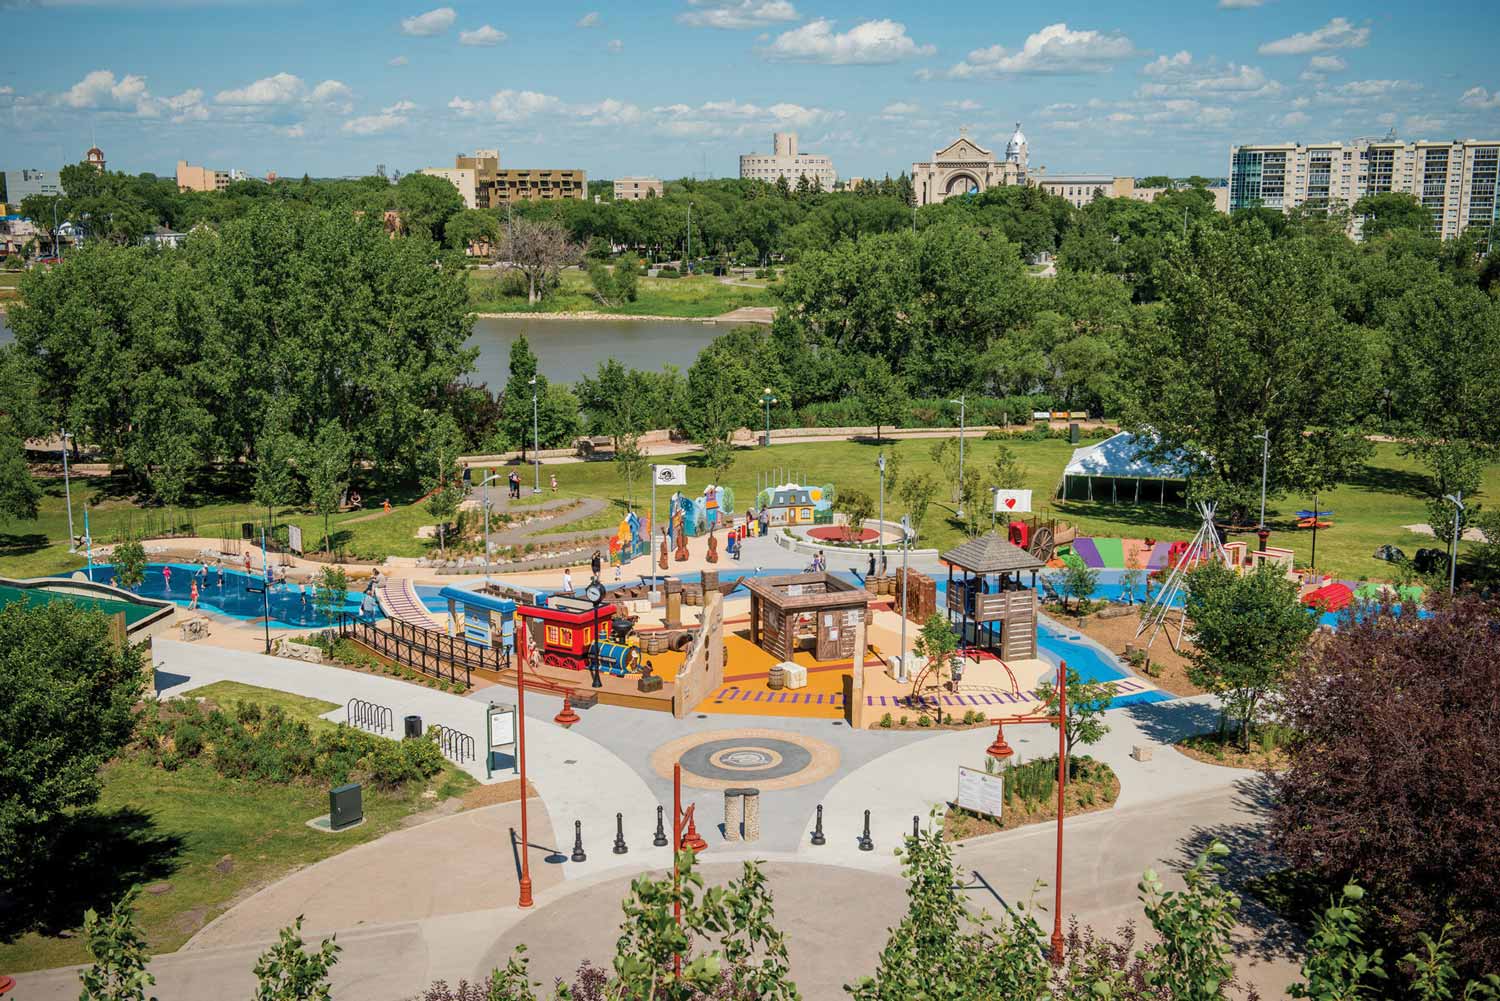 Aerial photo of a colourful park with a train, small buildings, splash pads, teepee, and play structures